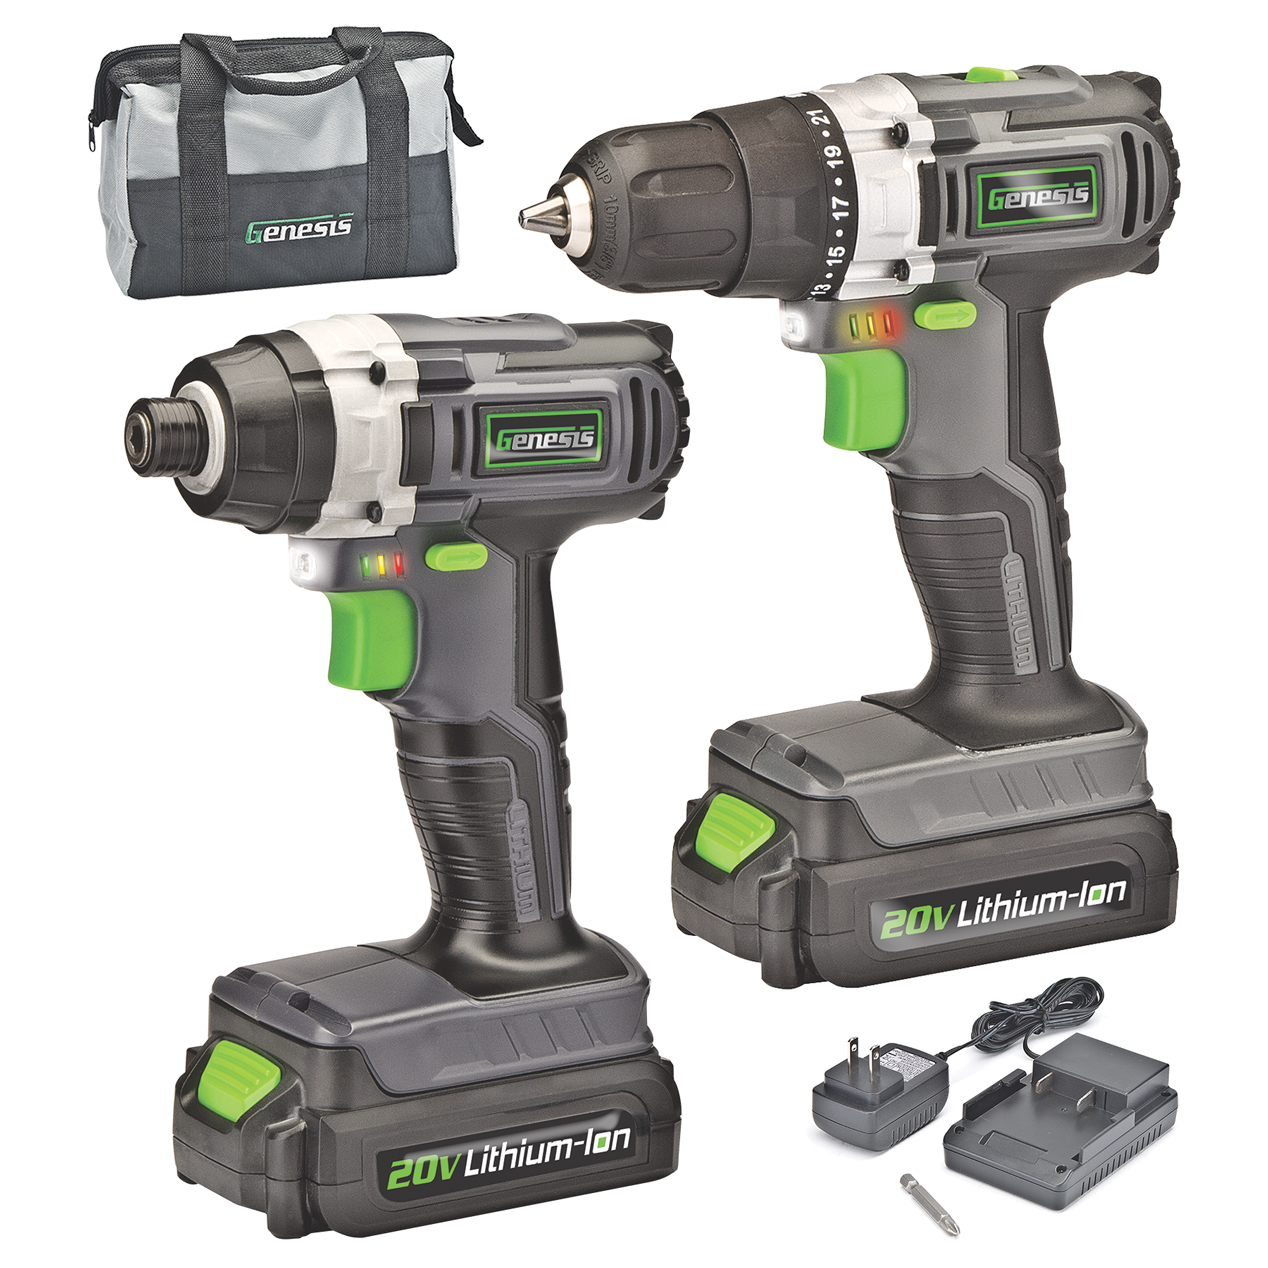 20V Lithium-Ion Drill / Impact Driver Combo Kit